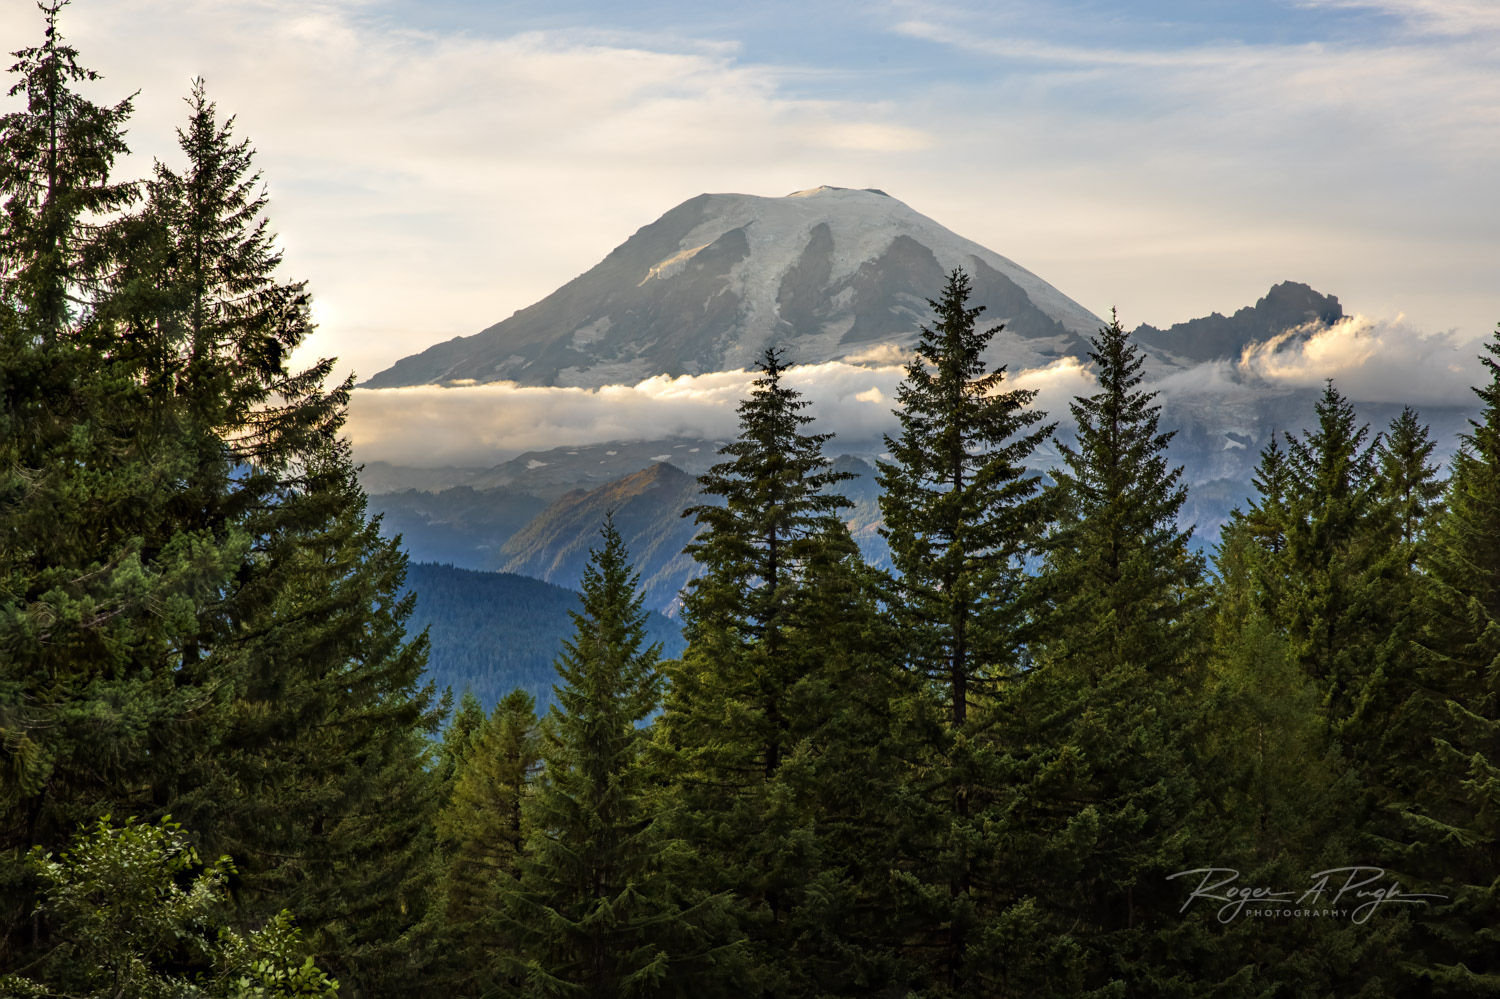 The sliver of clouds creeping along the base of the Mt Rainier show the height of this grand landscape.